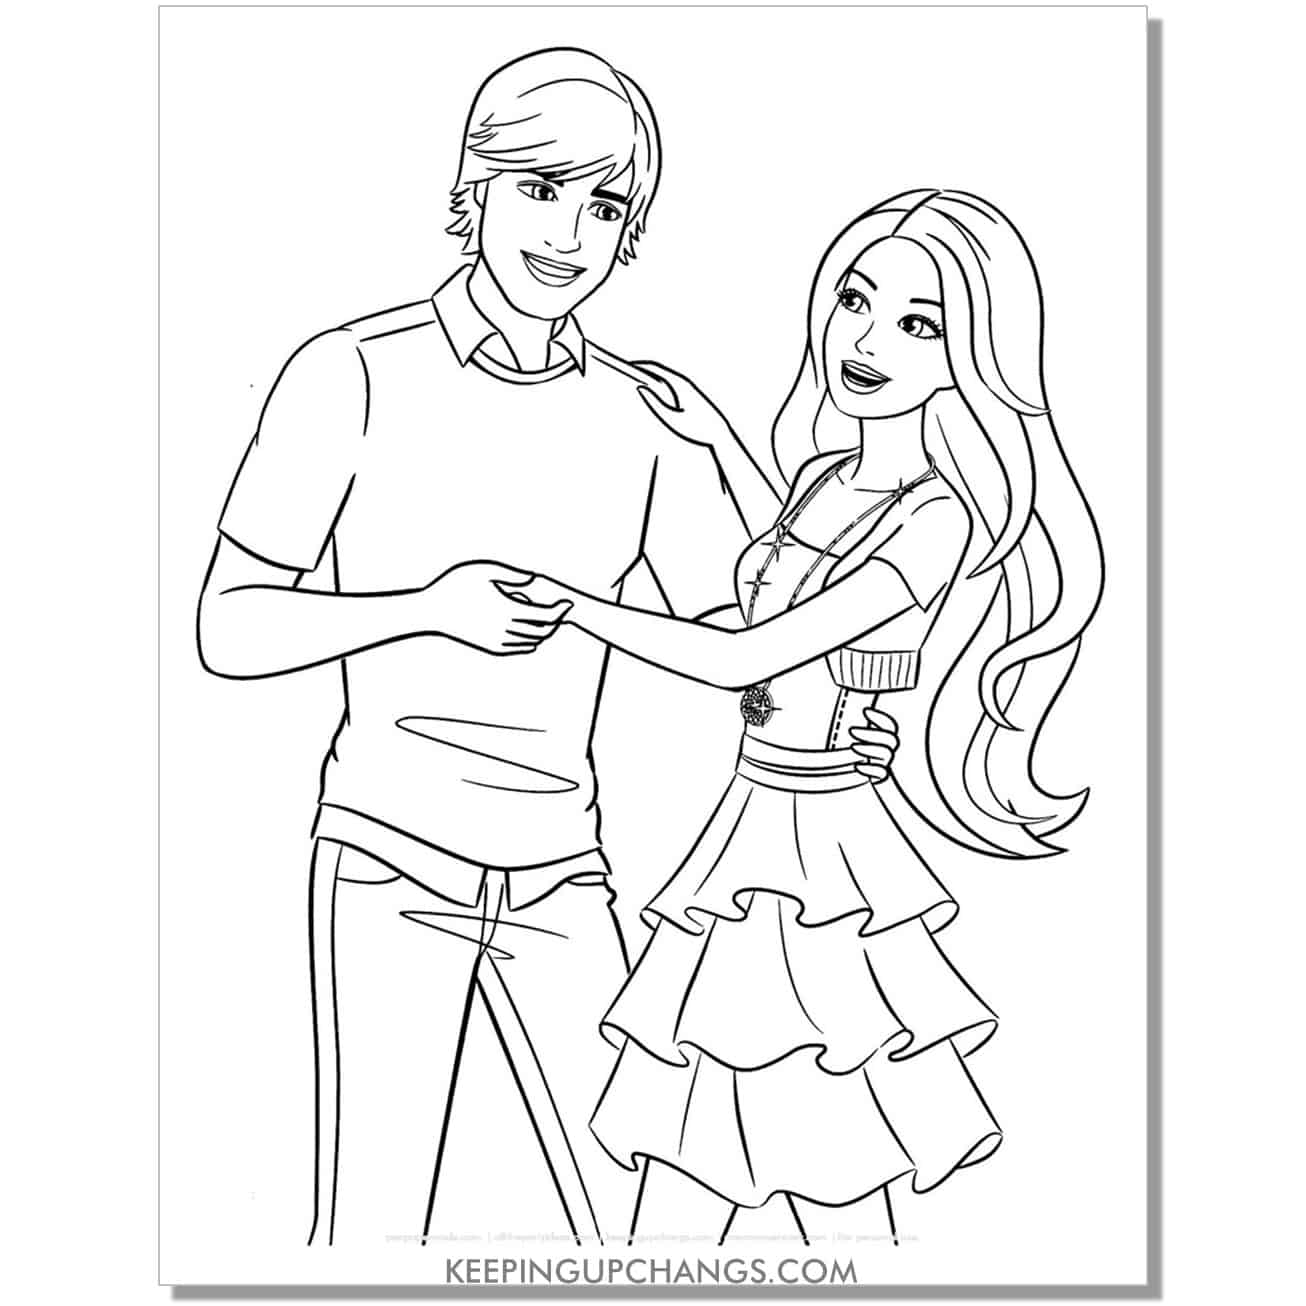 barbie holding ken's hand coloring page.